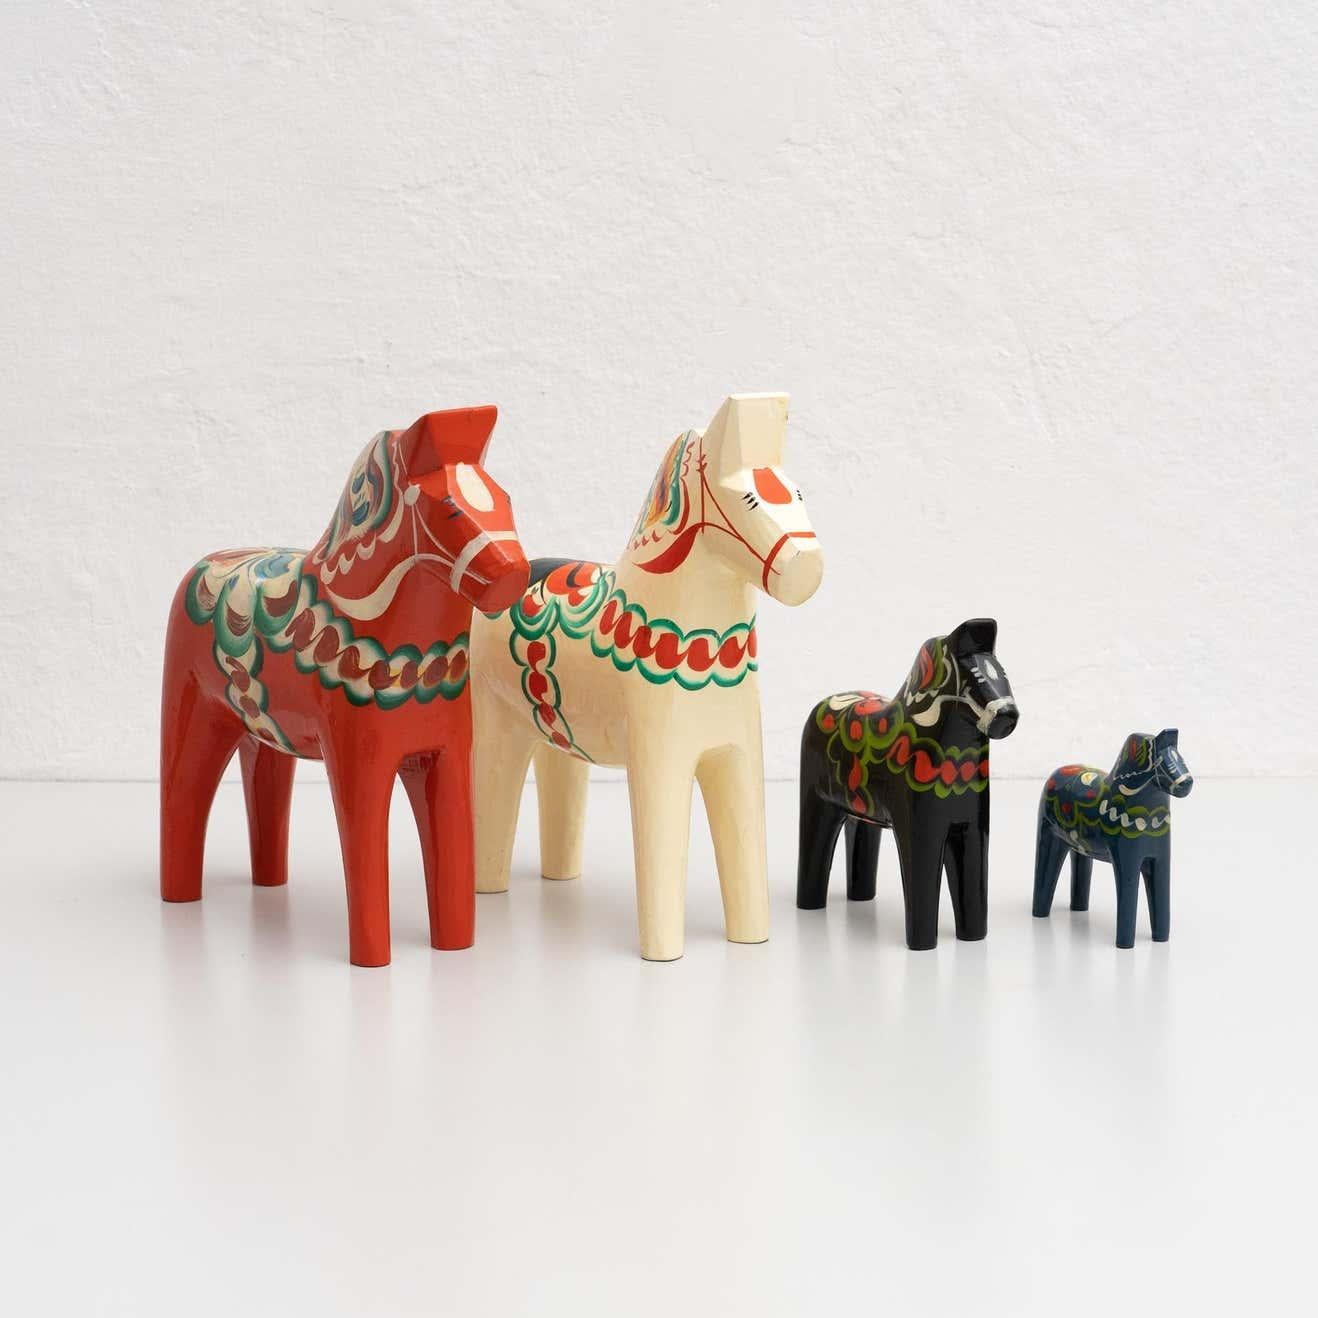 Set of 4 hand-painted Swedish wooden traditional Dala horse toy.

Designed by Nils Olsson in Sweden, circa 1960.
Materials:
Wood

In original condition, with minor wear consistent with age and use, preserving a beautiful